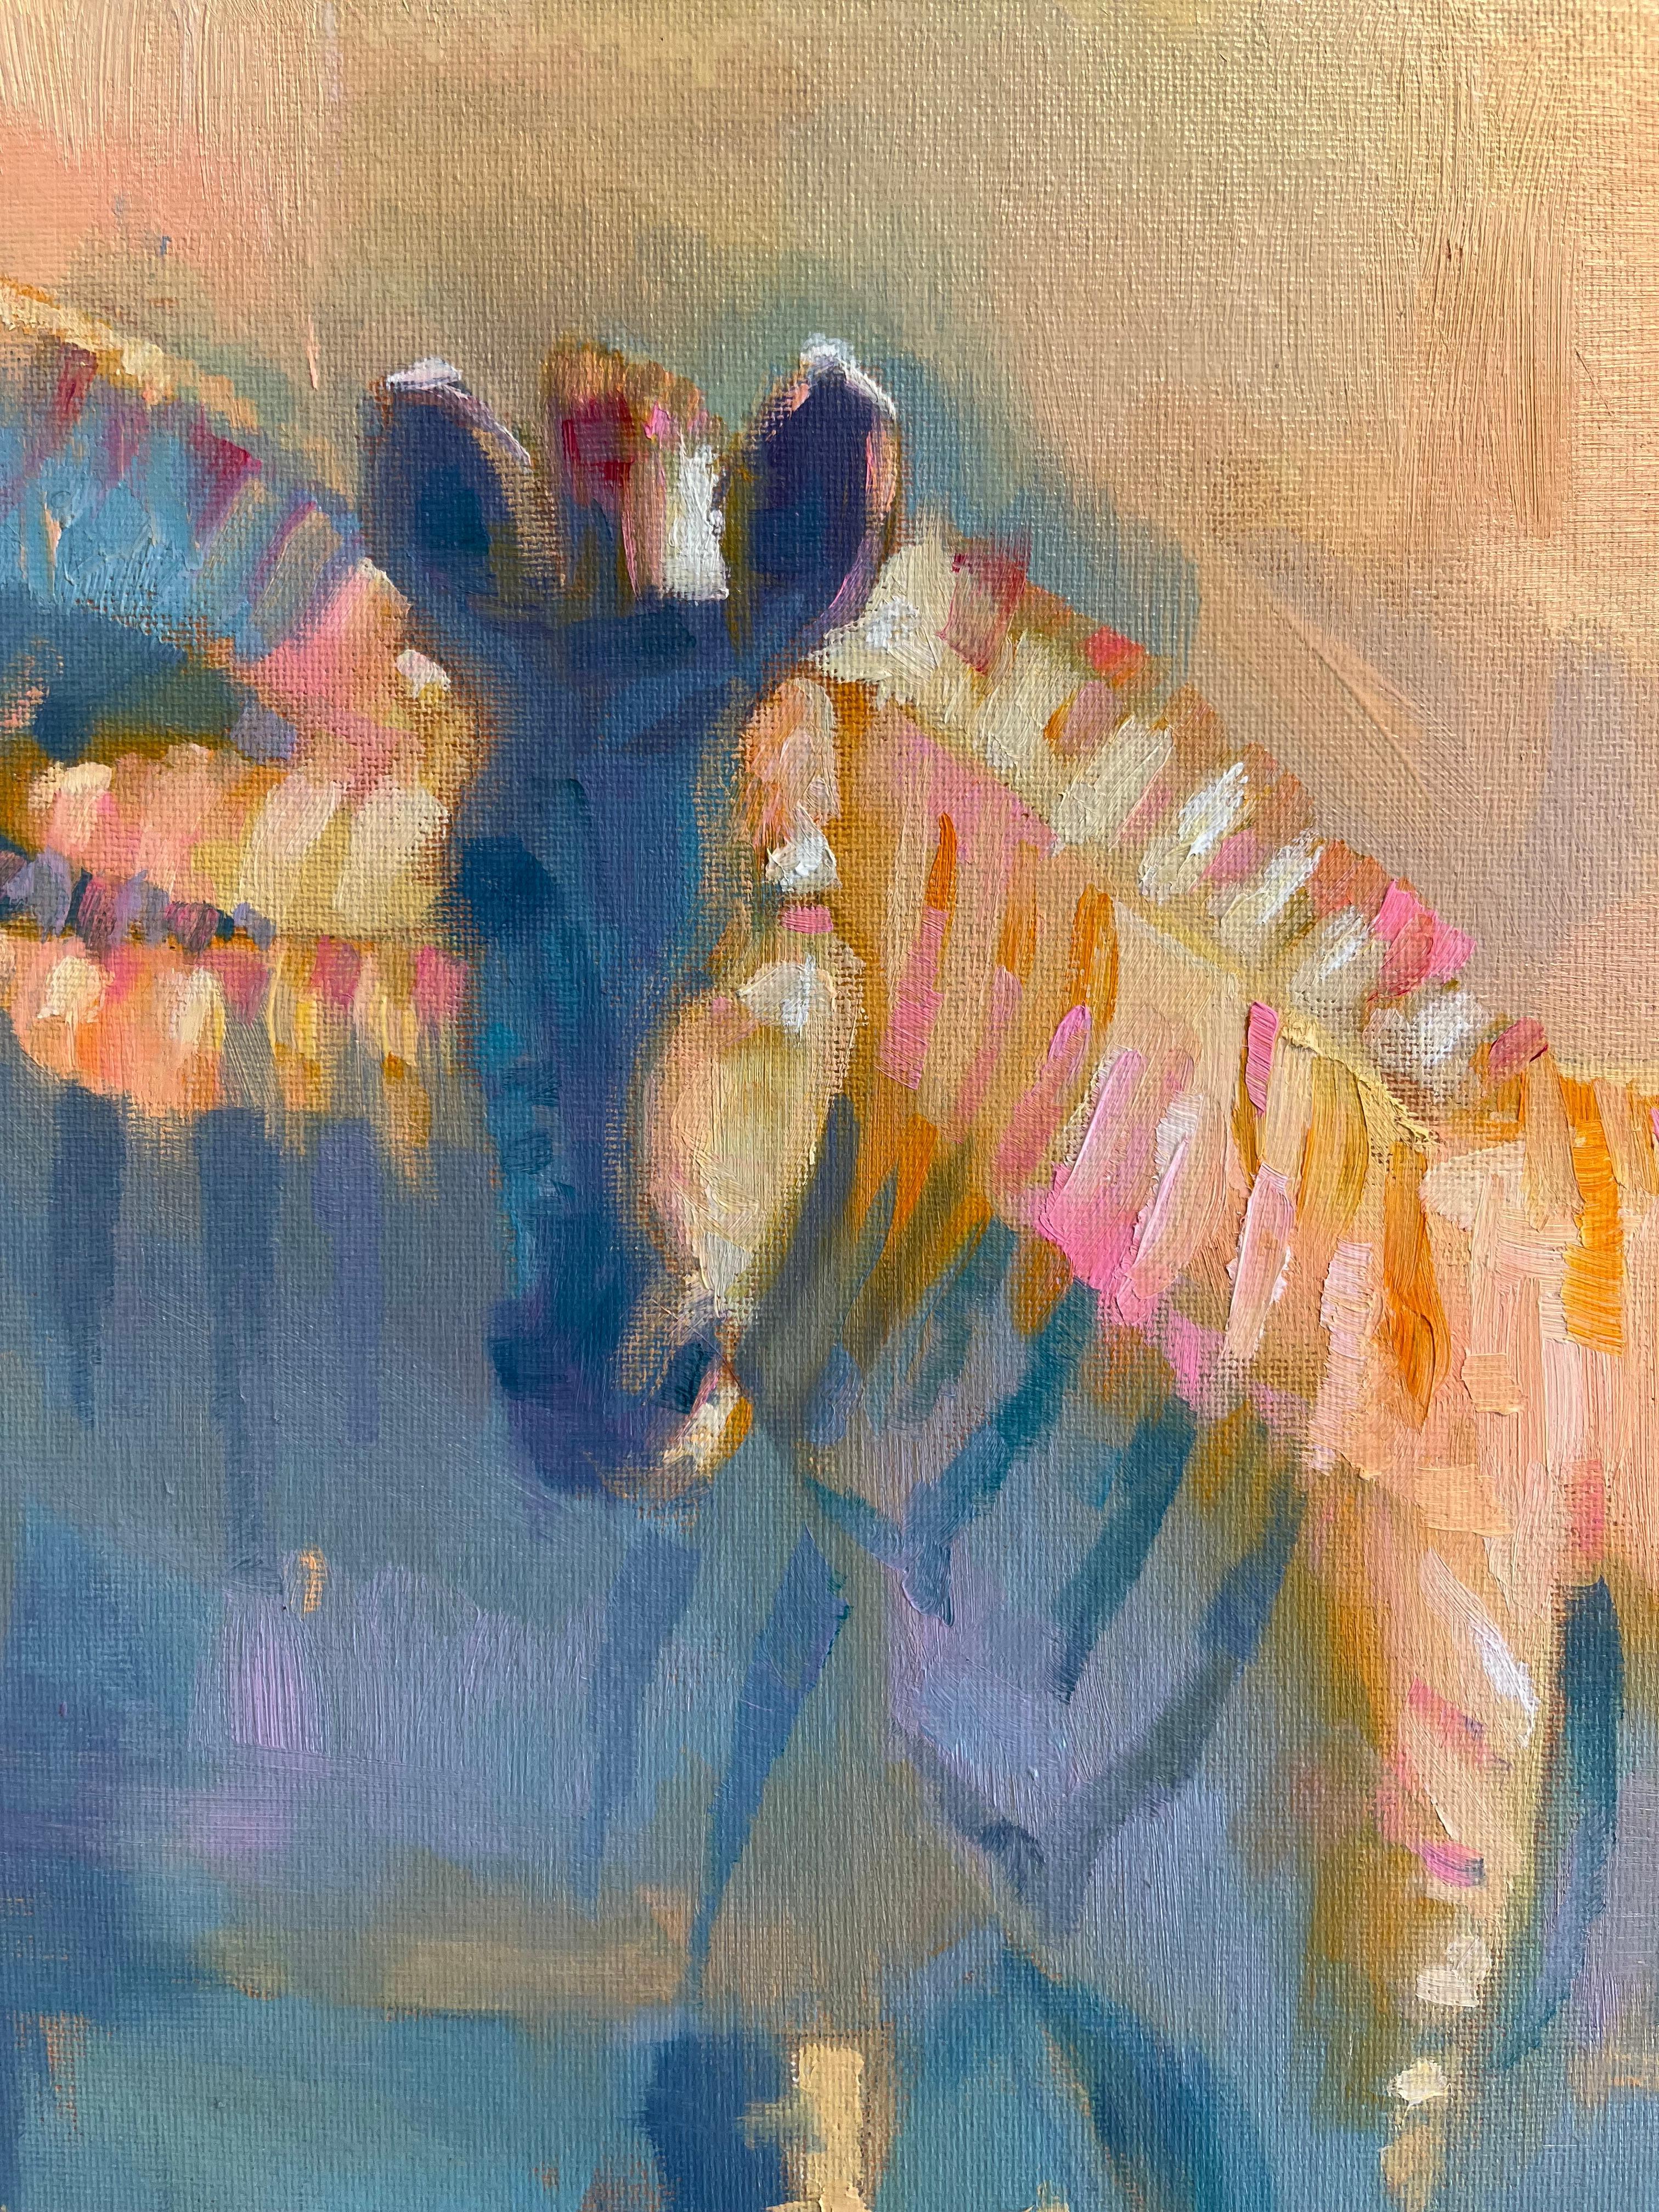 Coloured Stripes -original impressionism African wildlife paintings-Art - Impressionist Painting by Catherine Ingleby